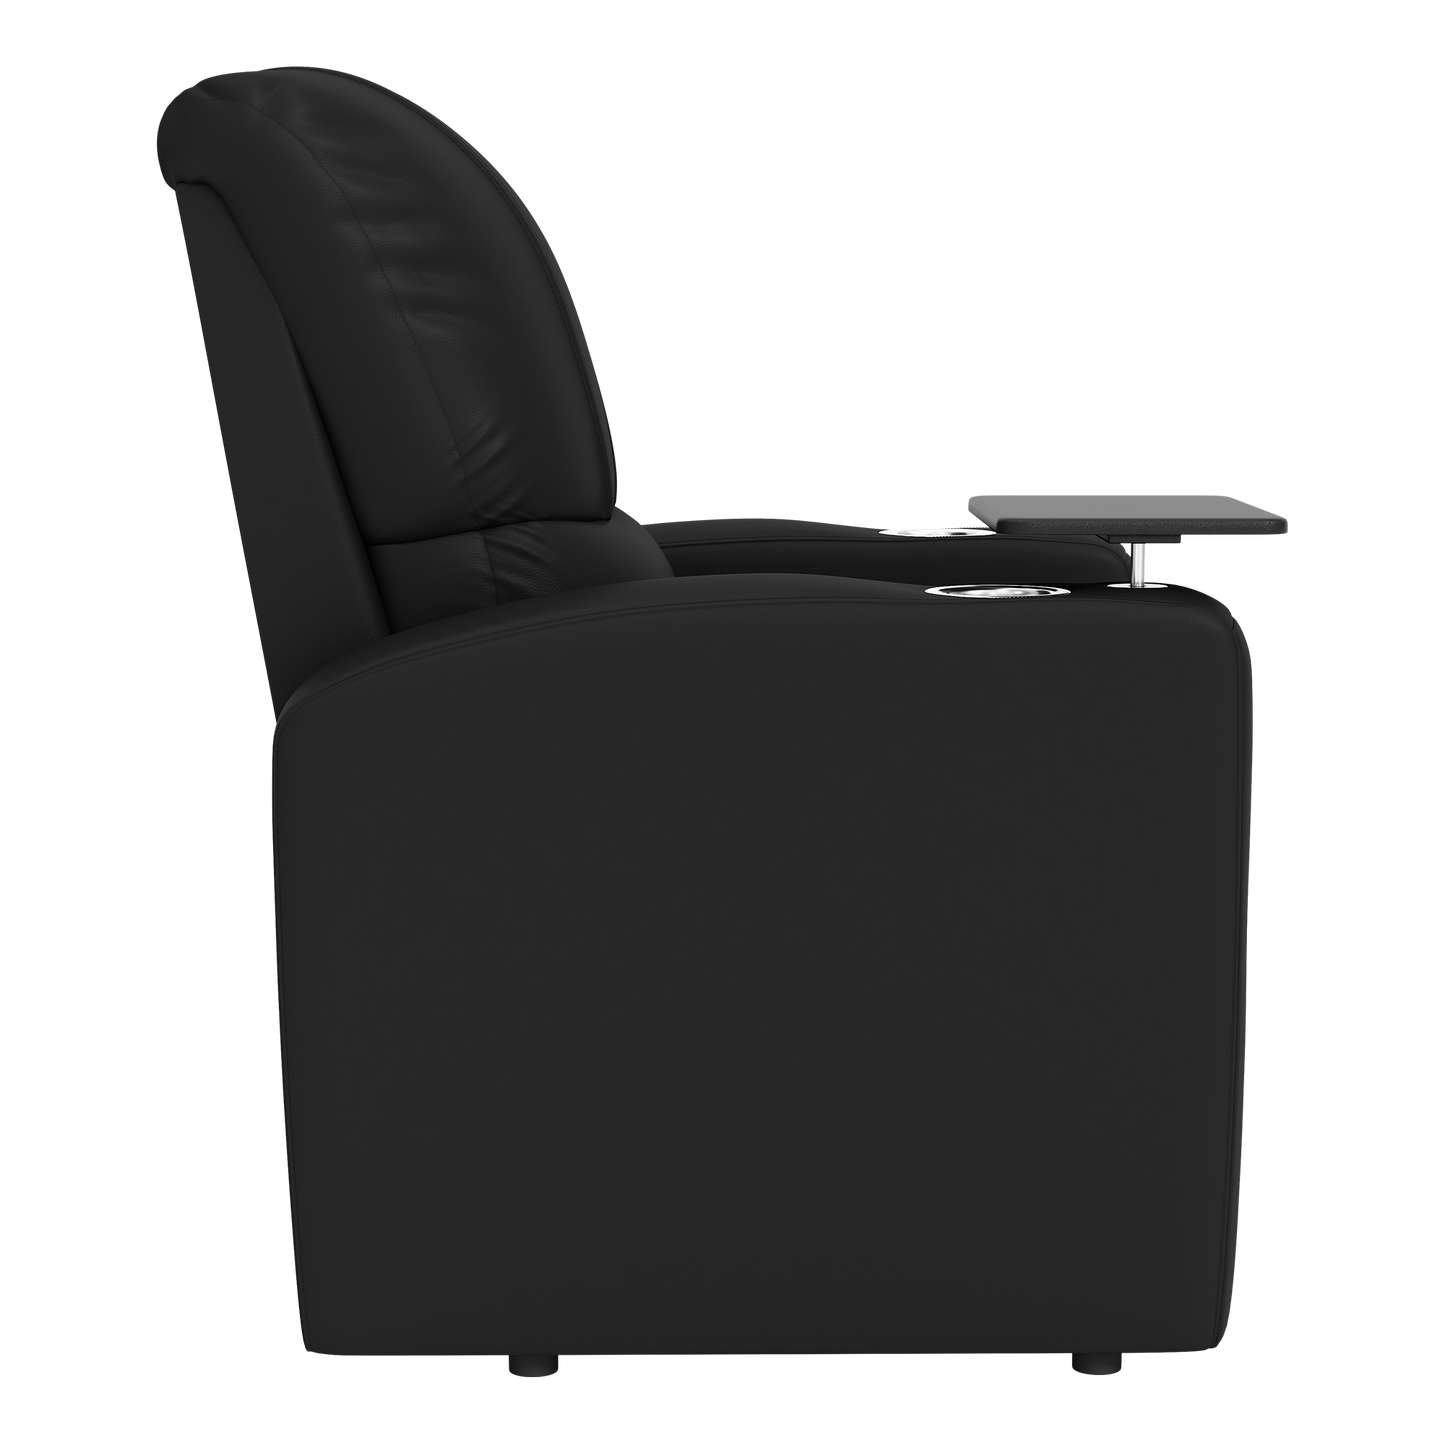 Stealth Power Plus Recliner with Oregon State Beavers Logo